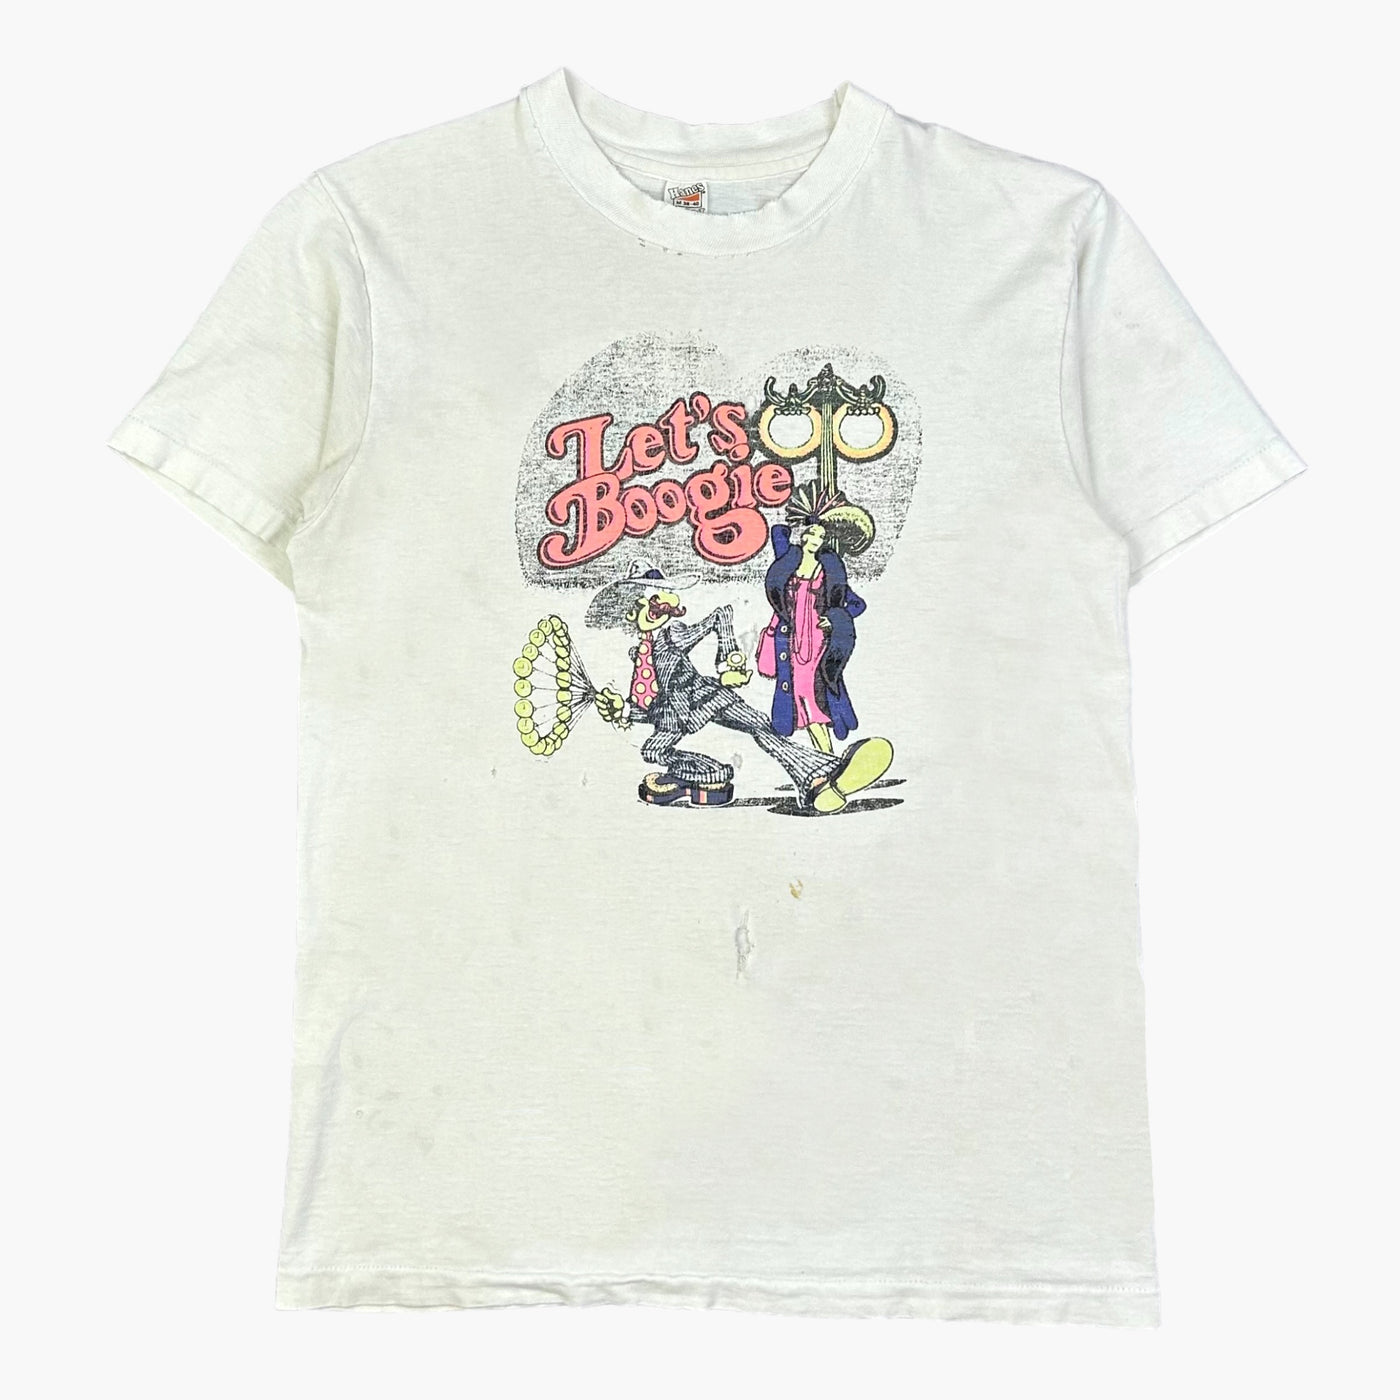 EARLY 80S LETS BOOGIE T-SHIRT